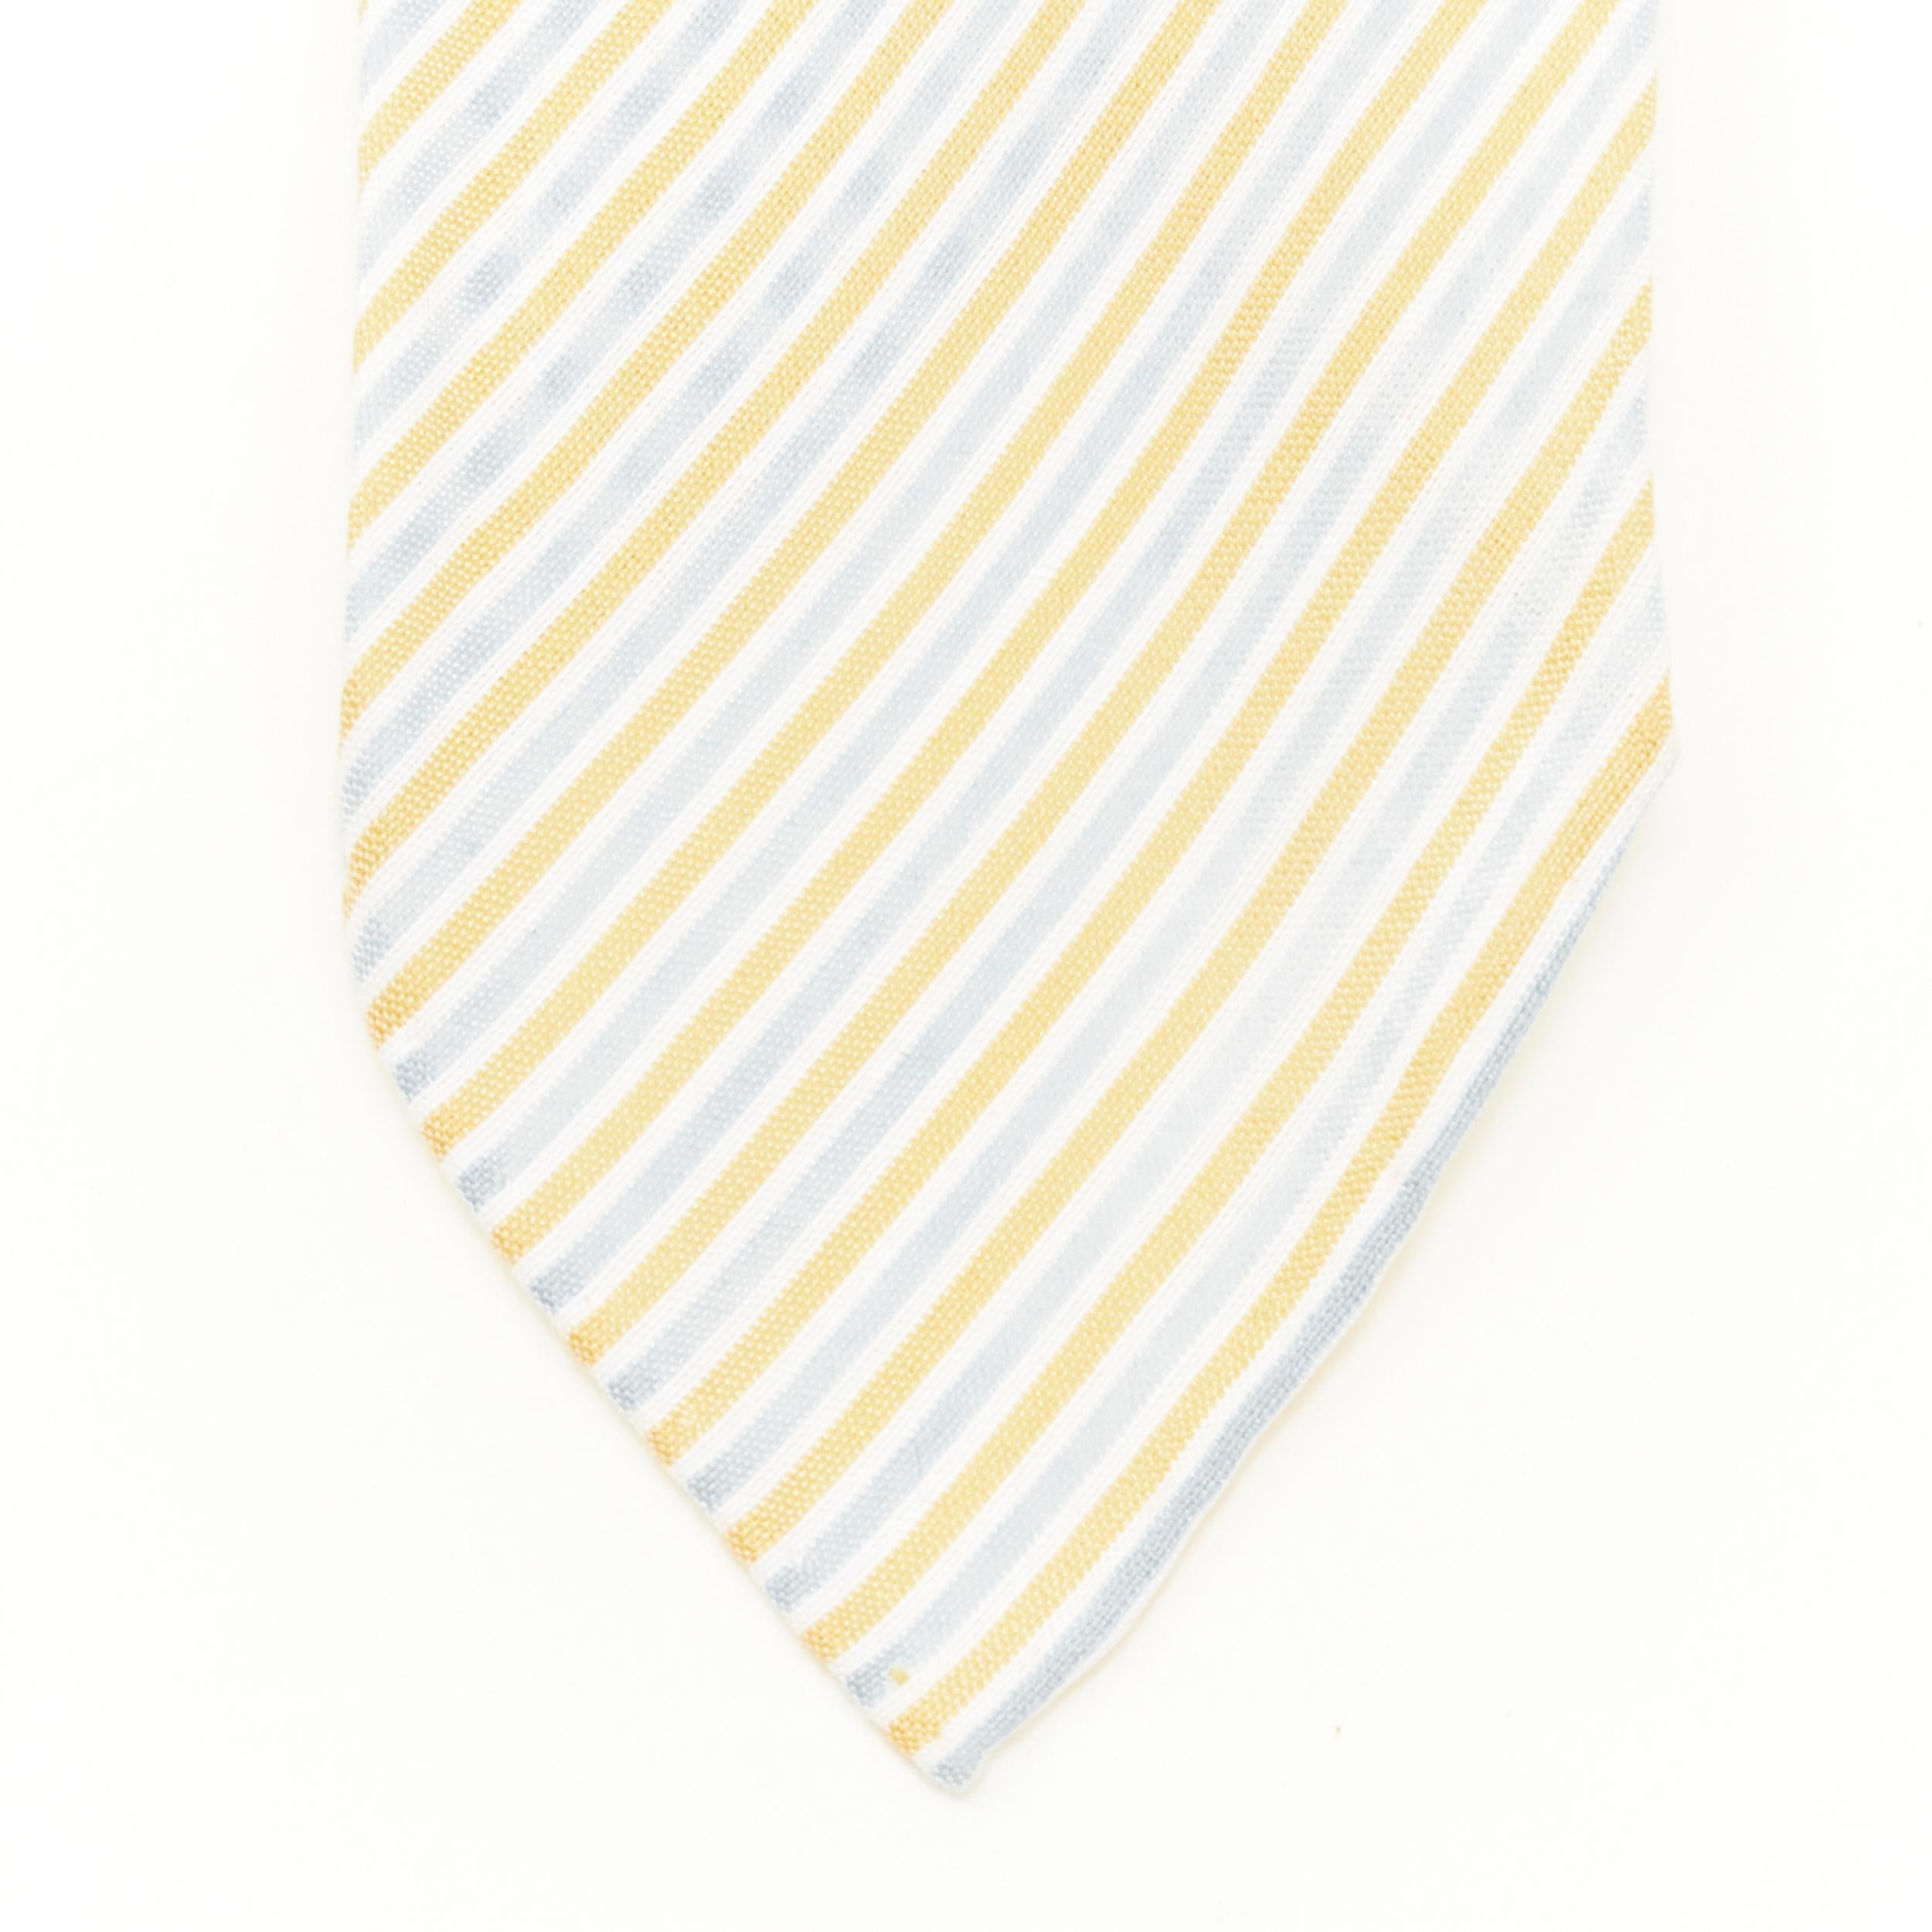 HERMES cotton silk blend orange grey striped summer tie 
Reference: JNWG/A00024 
Brand: Hermes 
Material: Cotton 
Color: Orange 
Pattern: Striped 
Estimated Retail Price: US $260 
Made in: France 

CONDITION: 
Condition: Very good, this item was